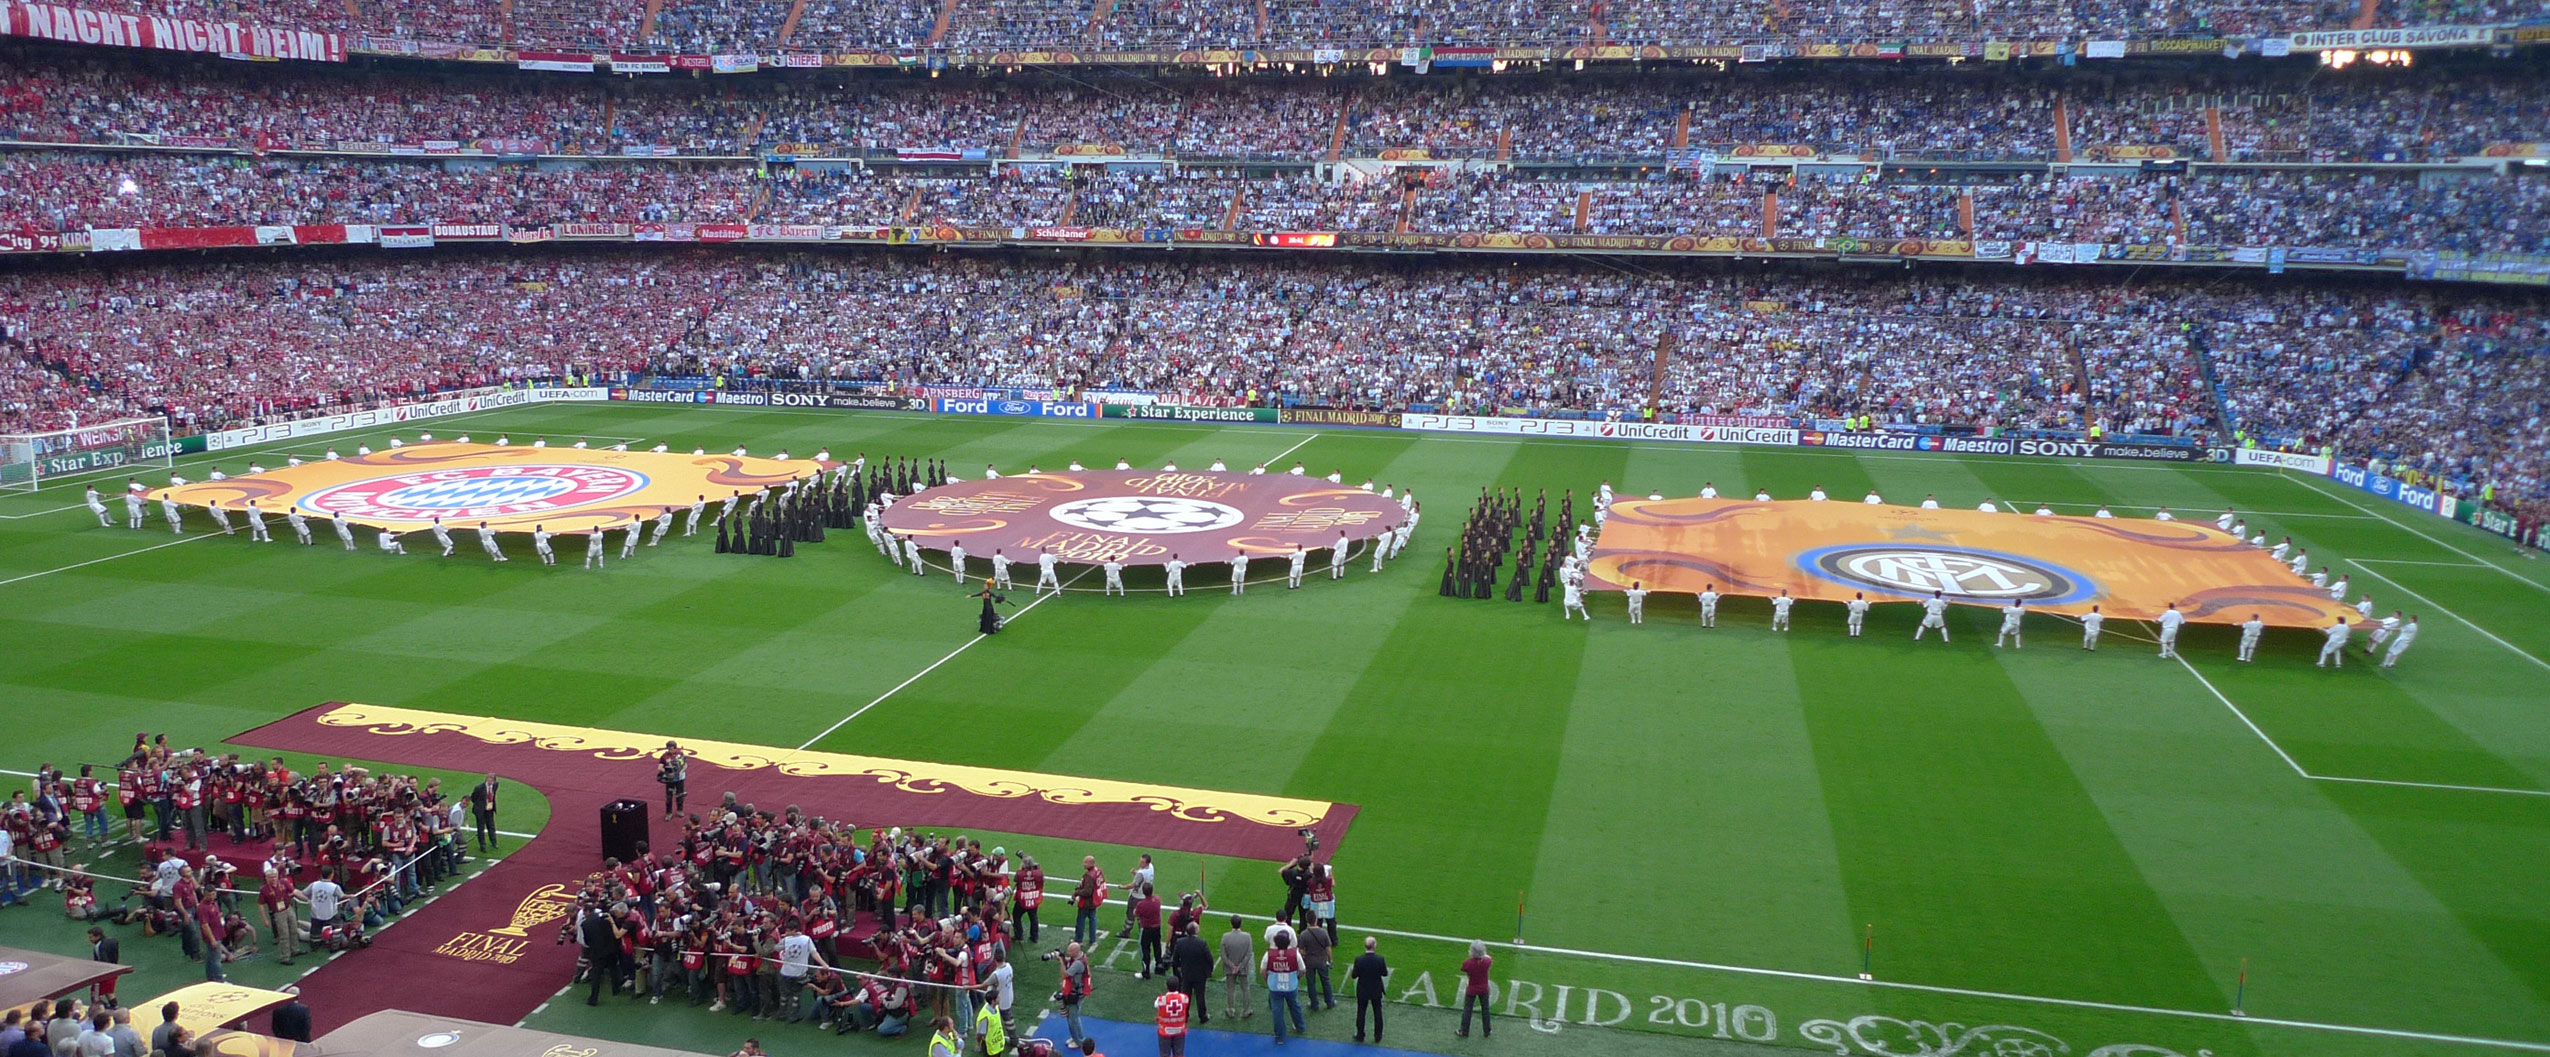 Opening ceremony of the 2009-2010 UEFA Champions League final